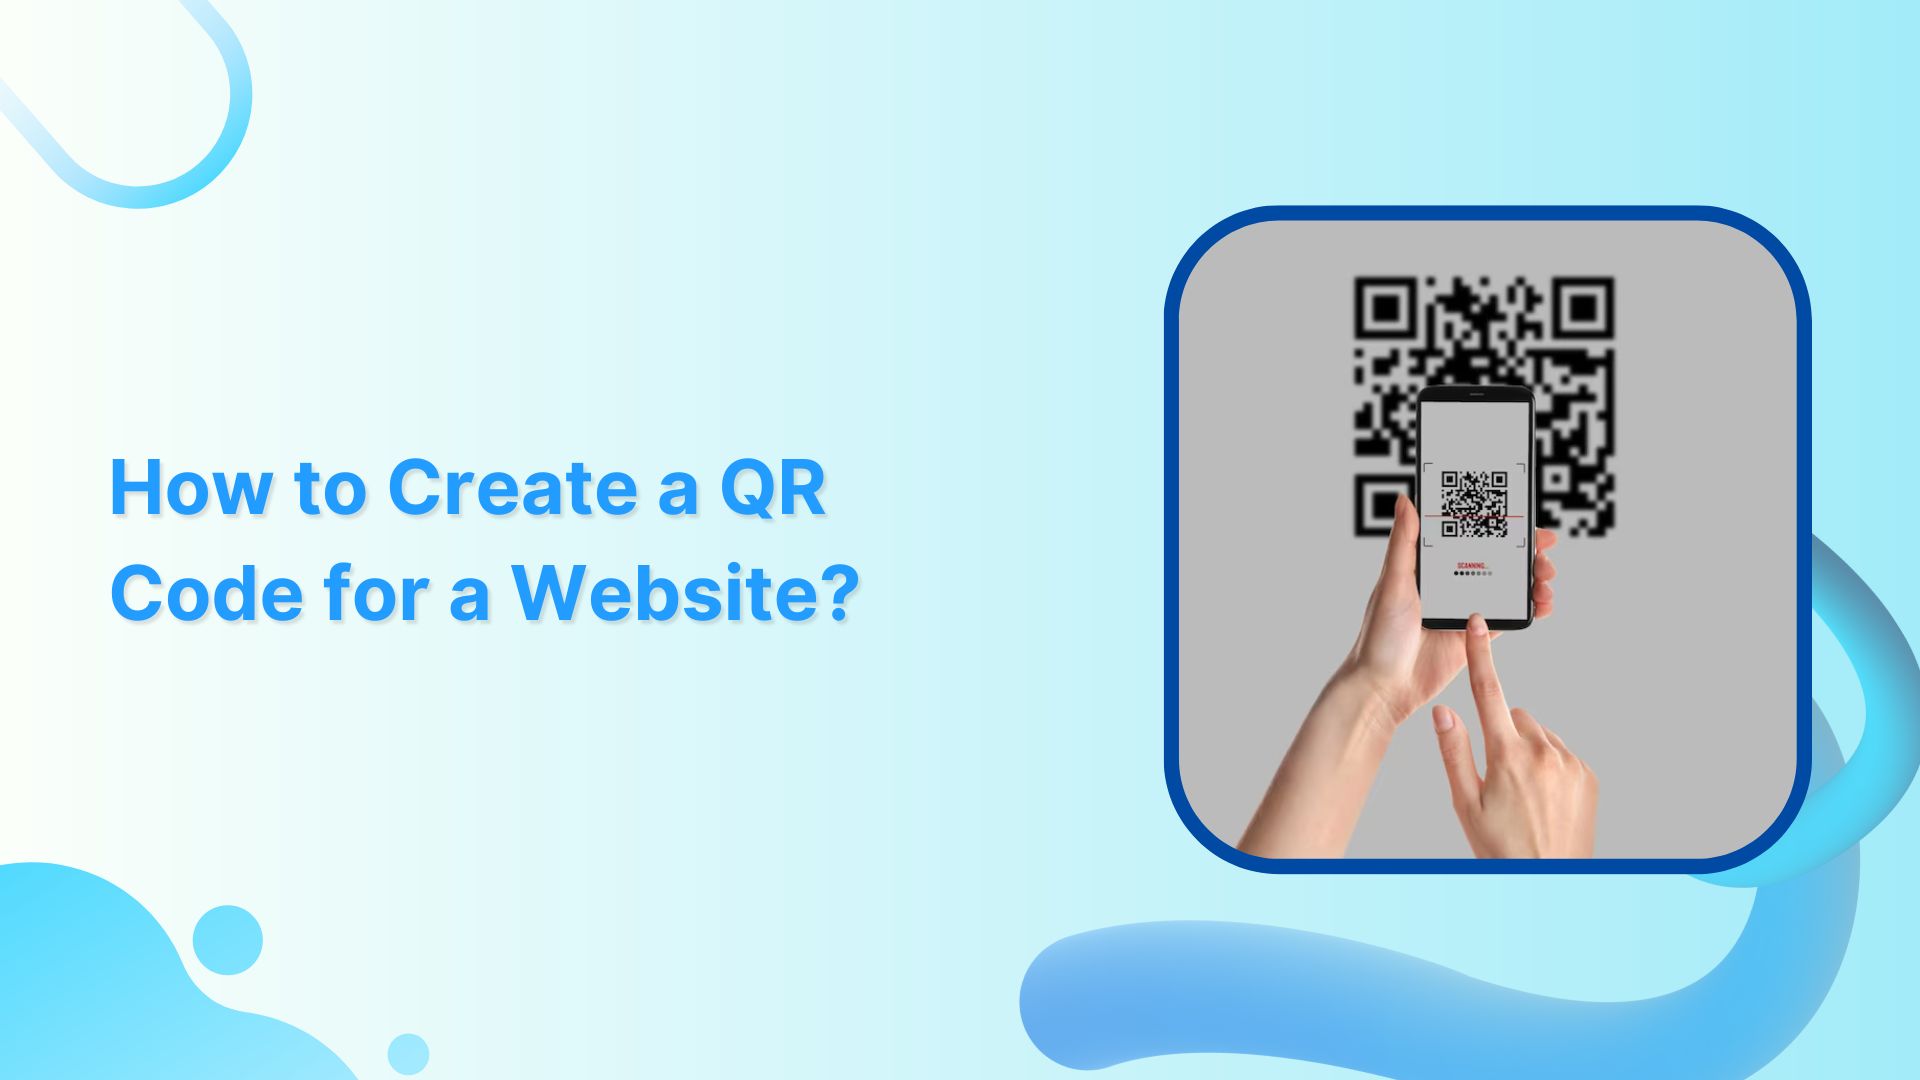 How to Link a QR Code to a Website: A Quick Guide